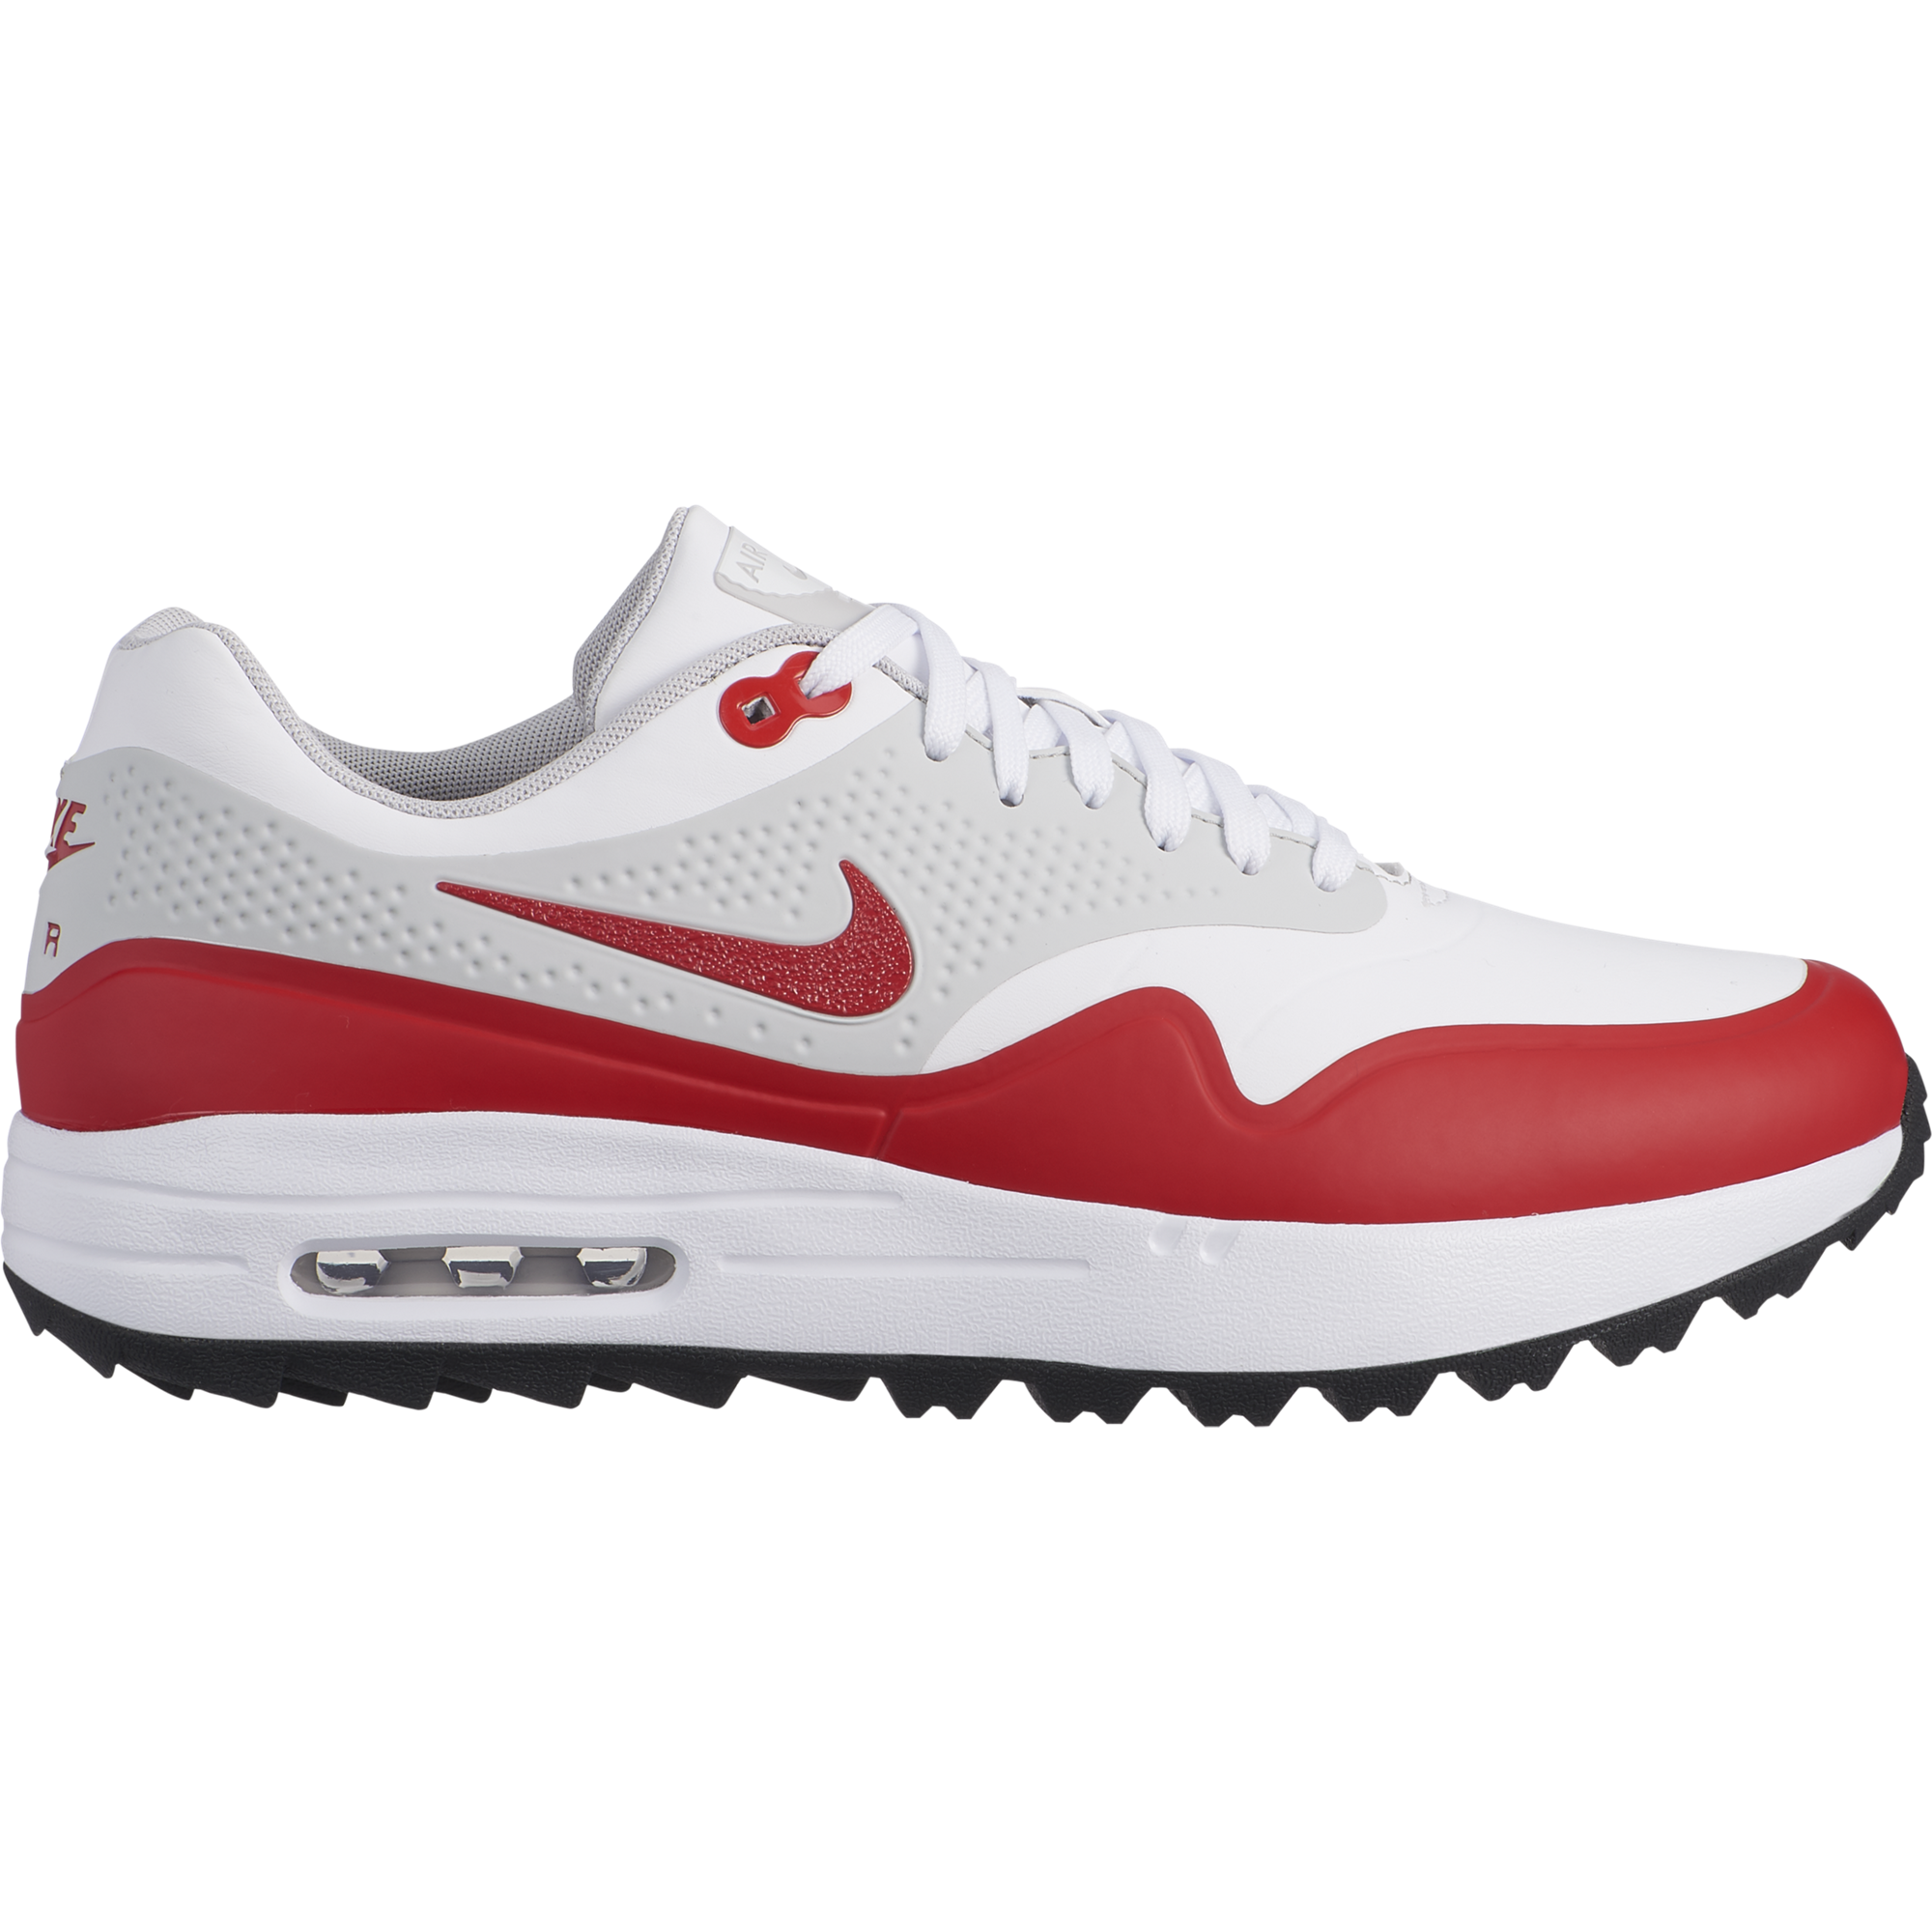 red and white air max 1 mens